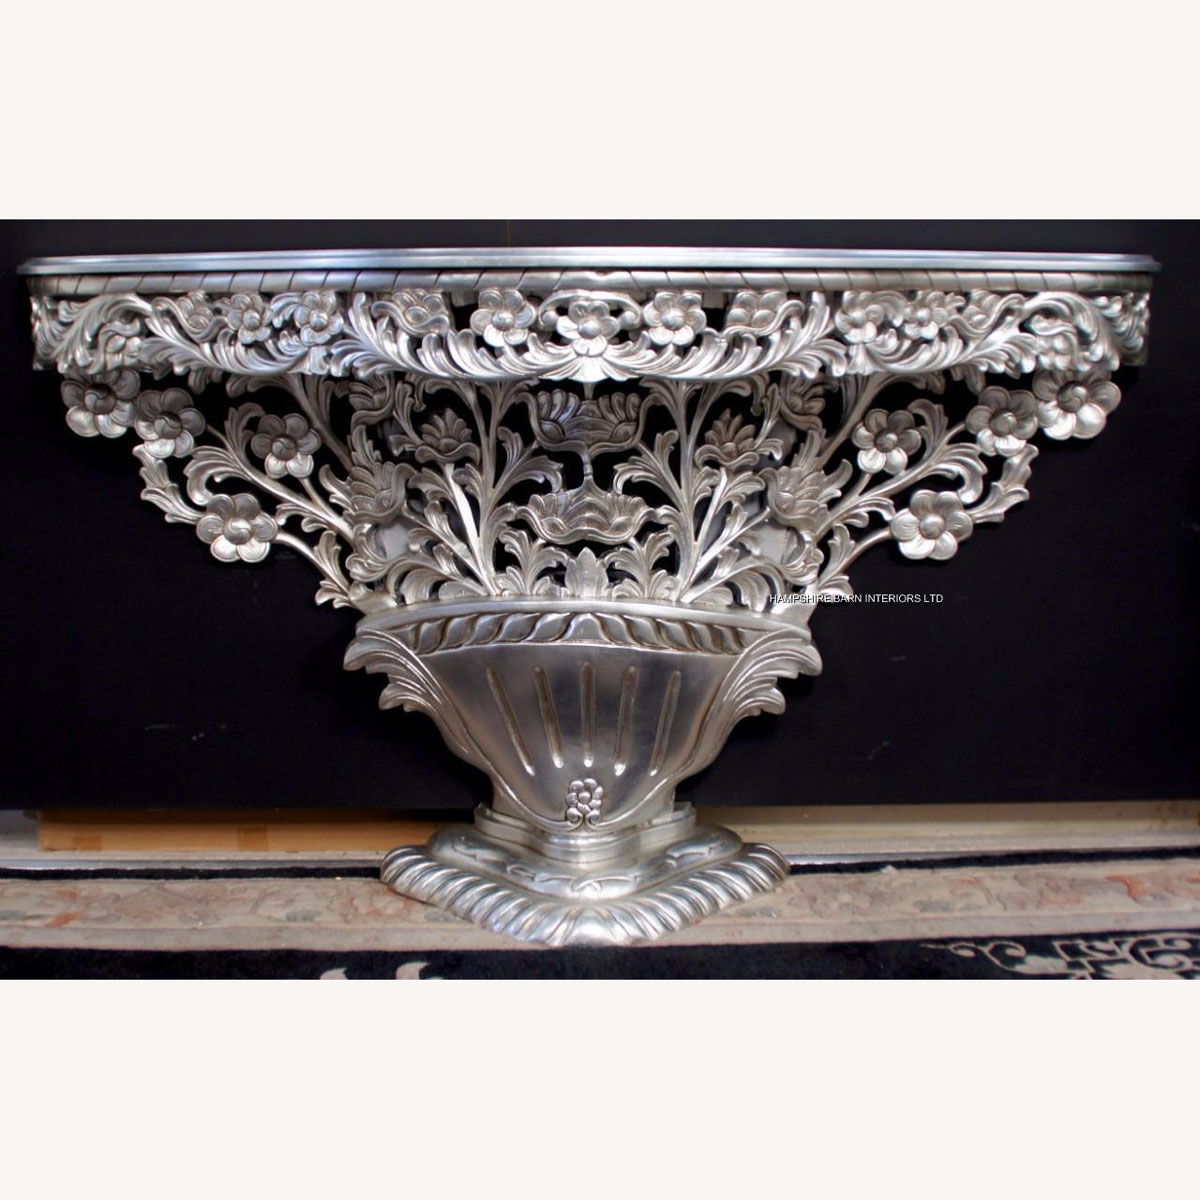 Bouquet De Fleur Silver Leaf Hall Console Table Flower Carved Mahogany Also In Gold 1 - Hampshire Barn Interiors - Bouquet De Fleur Silver Leaf Hall Console Table Flower Carved Mahogany ( Also In Gold) -